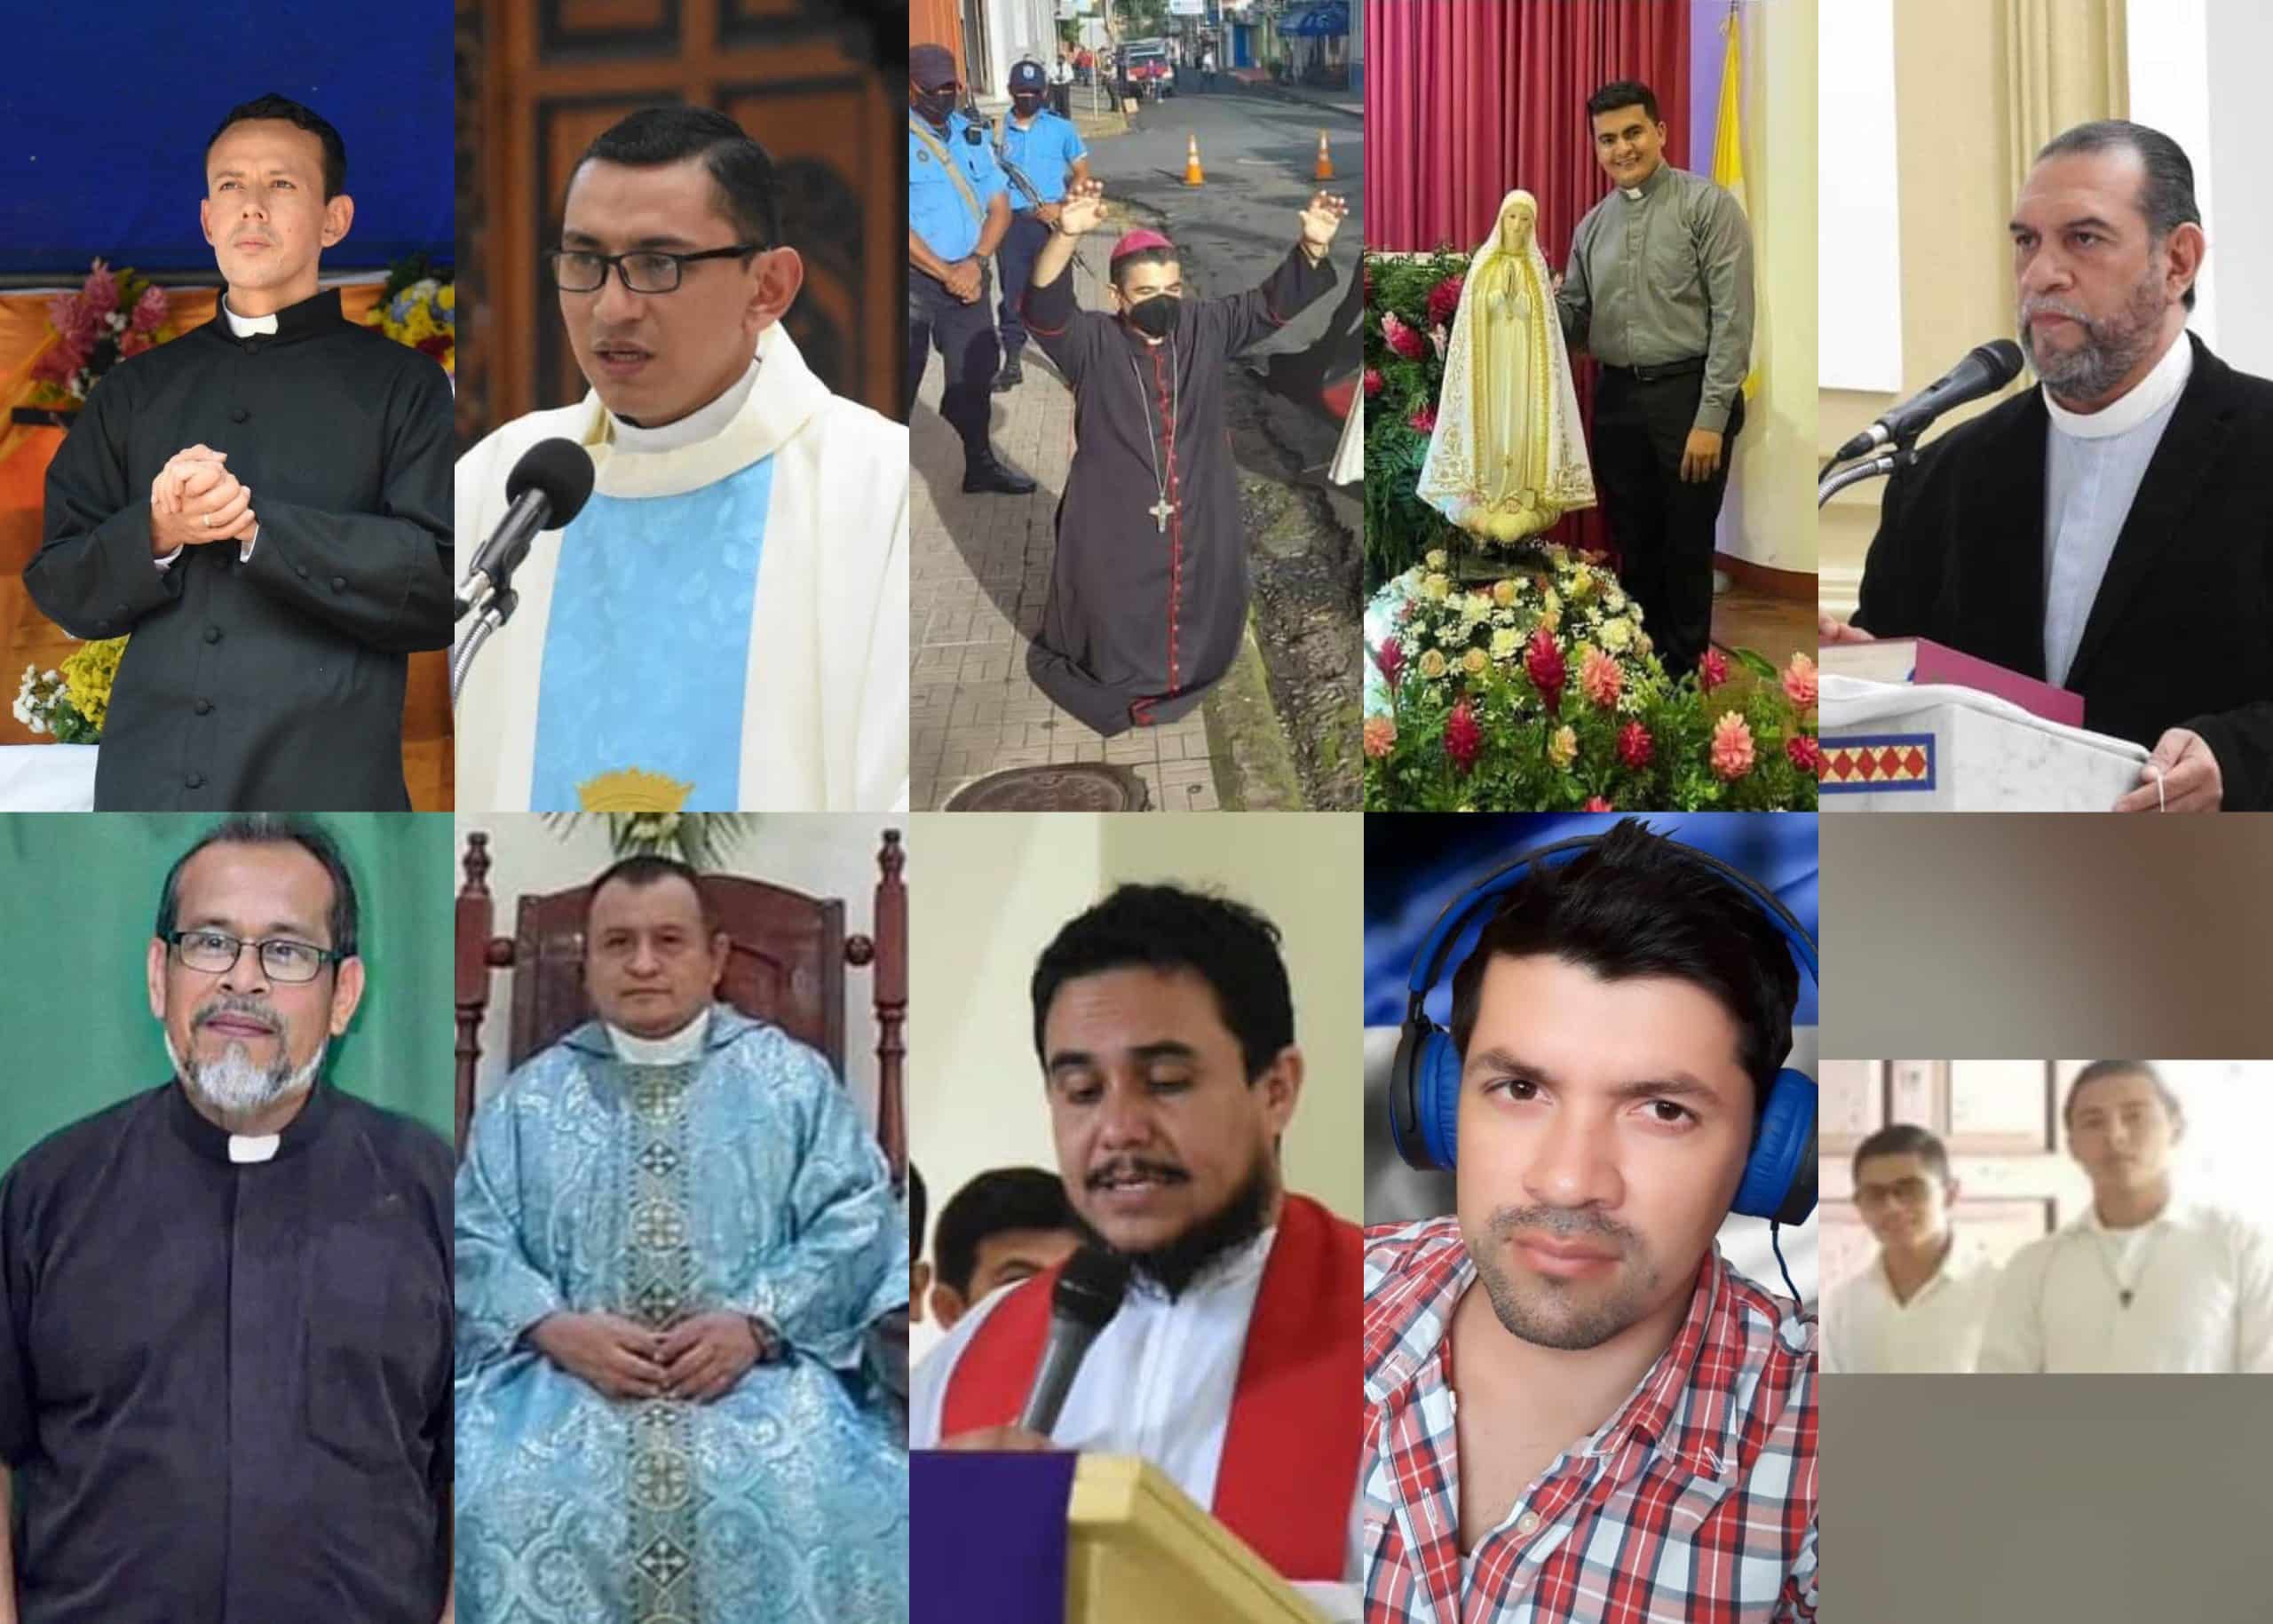 Priests imprisoned in El Chipote are held incommunicado and overcrowded